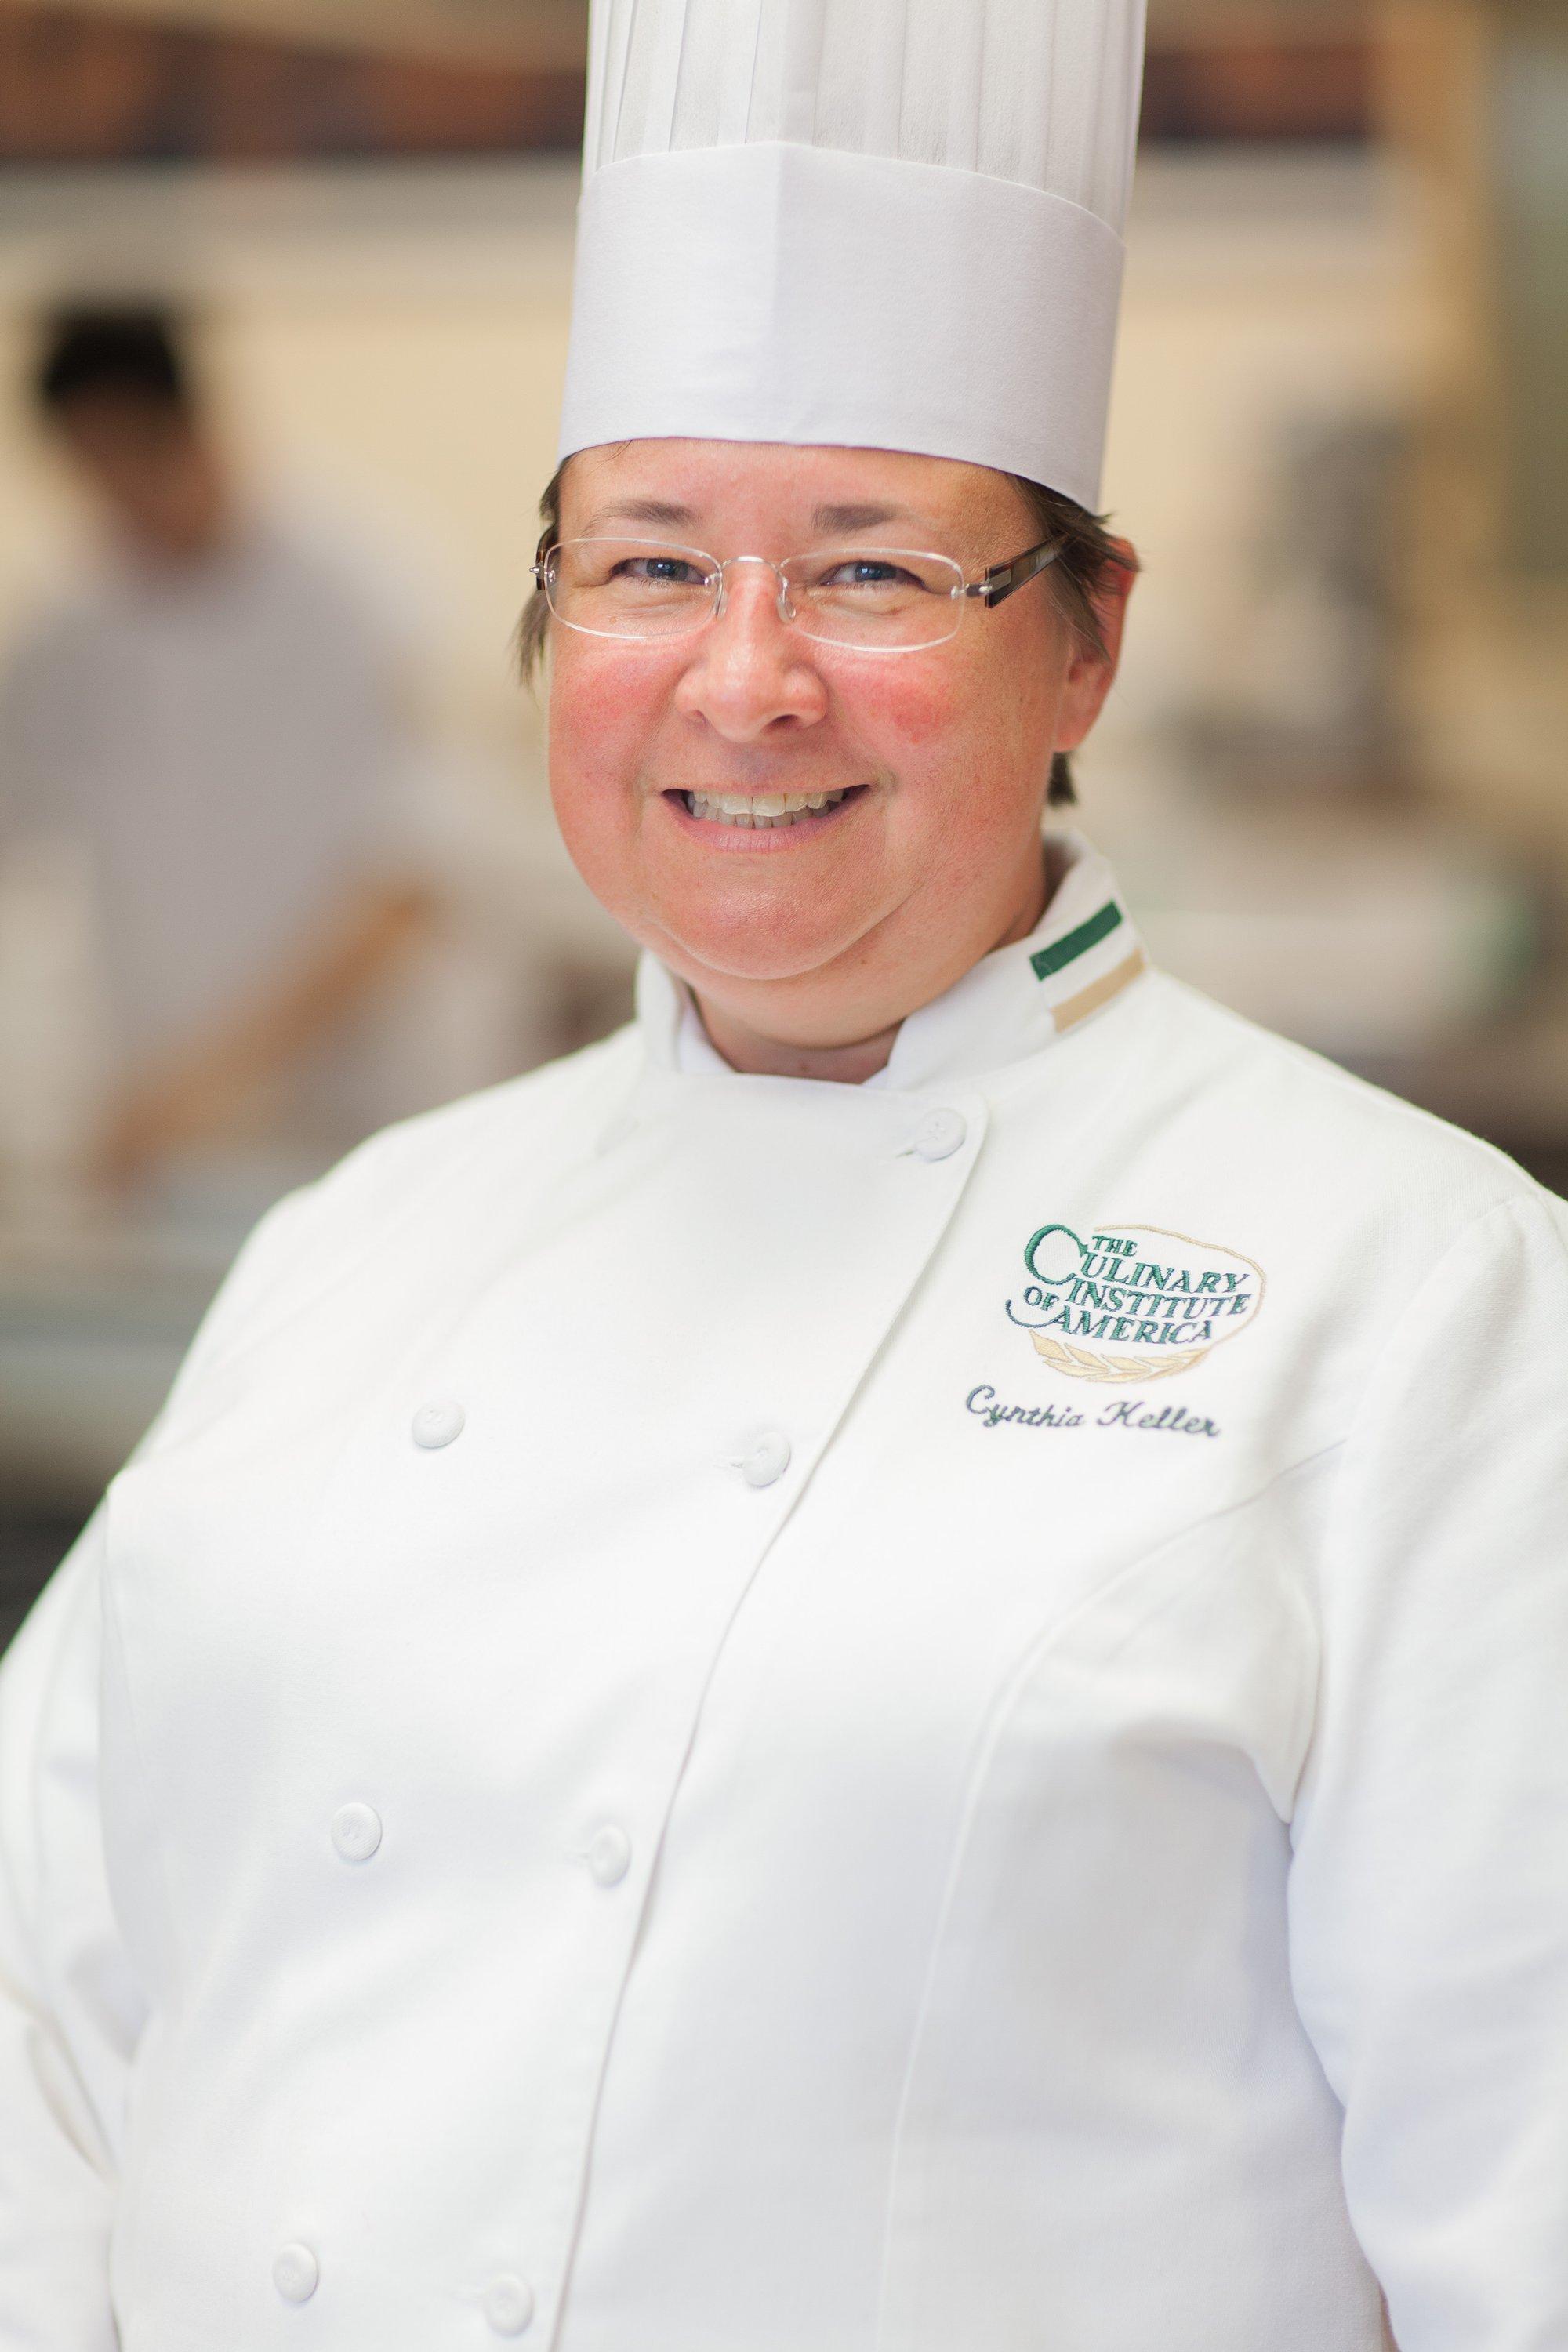 #1457: Stirring Things Up At The Culinary Institute